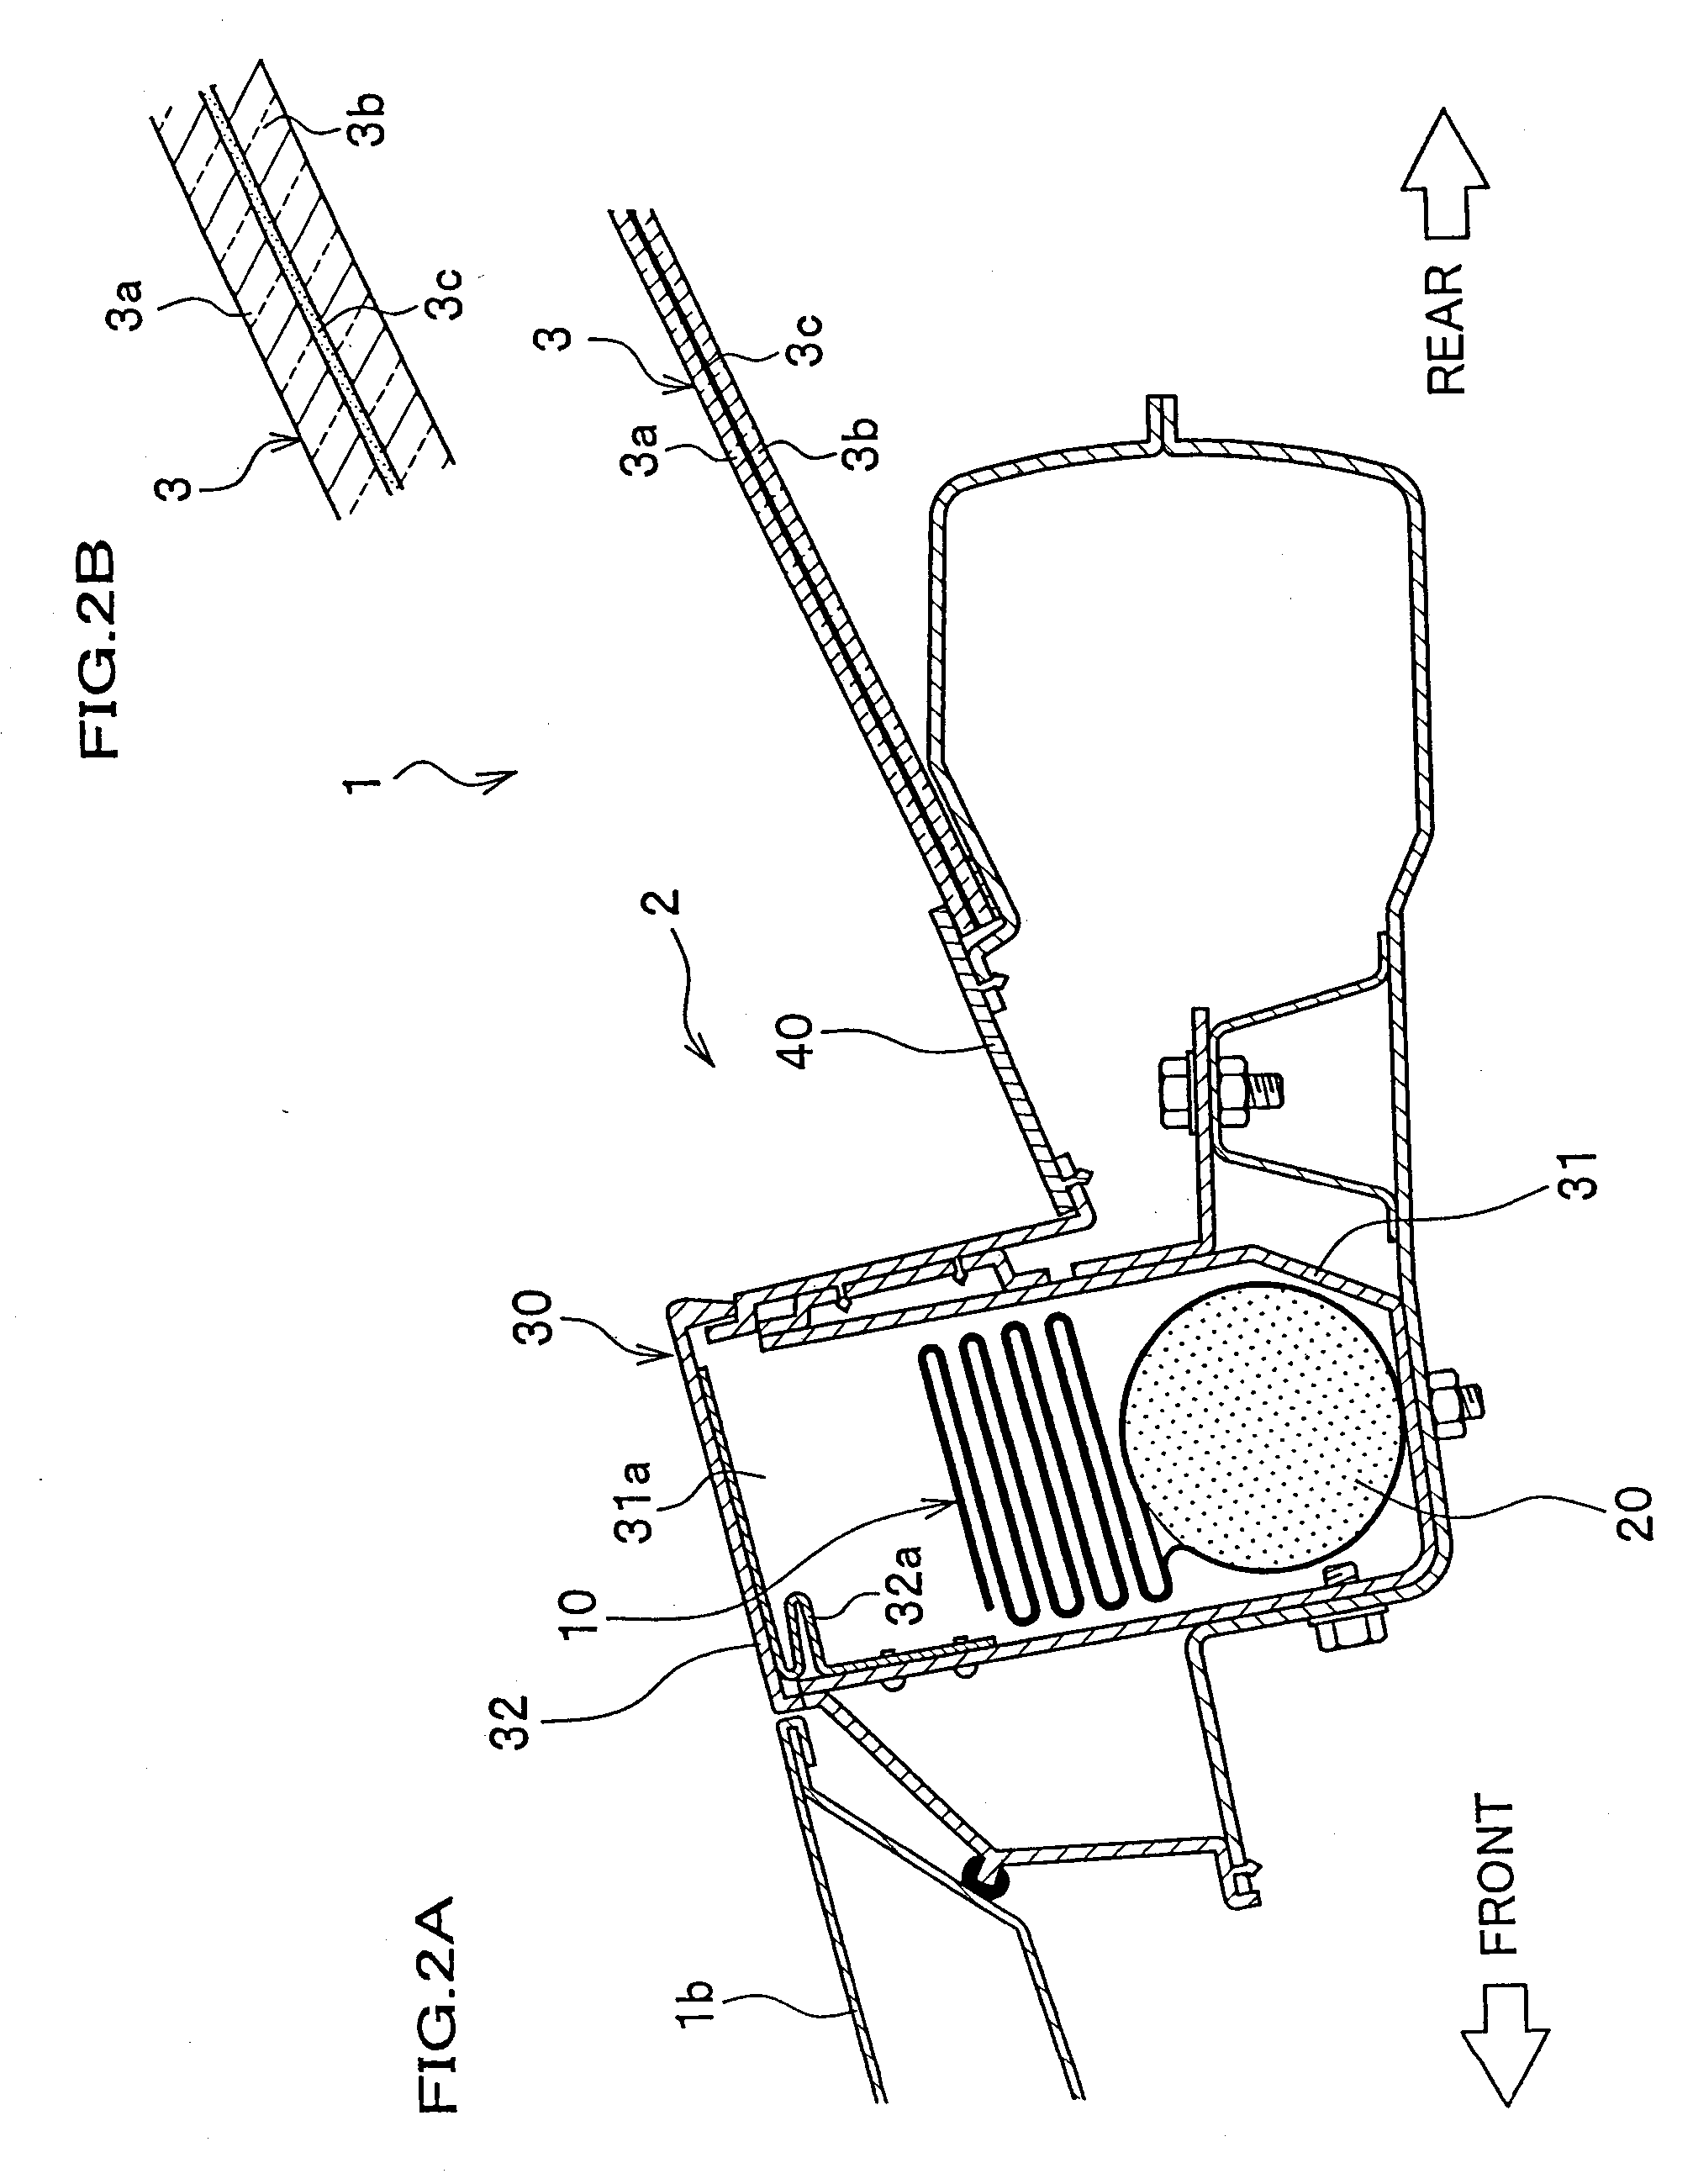 Vehicle with collision object protection device